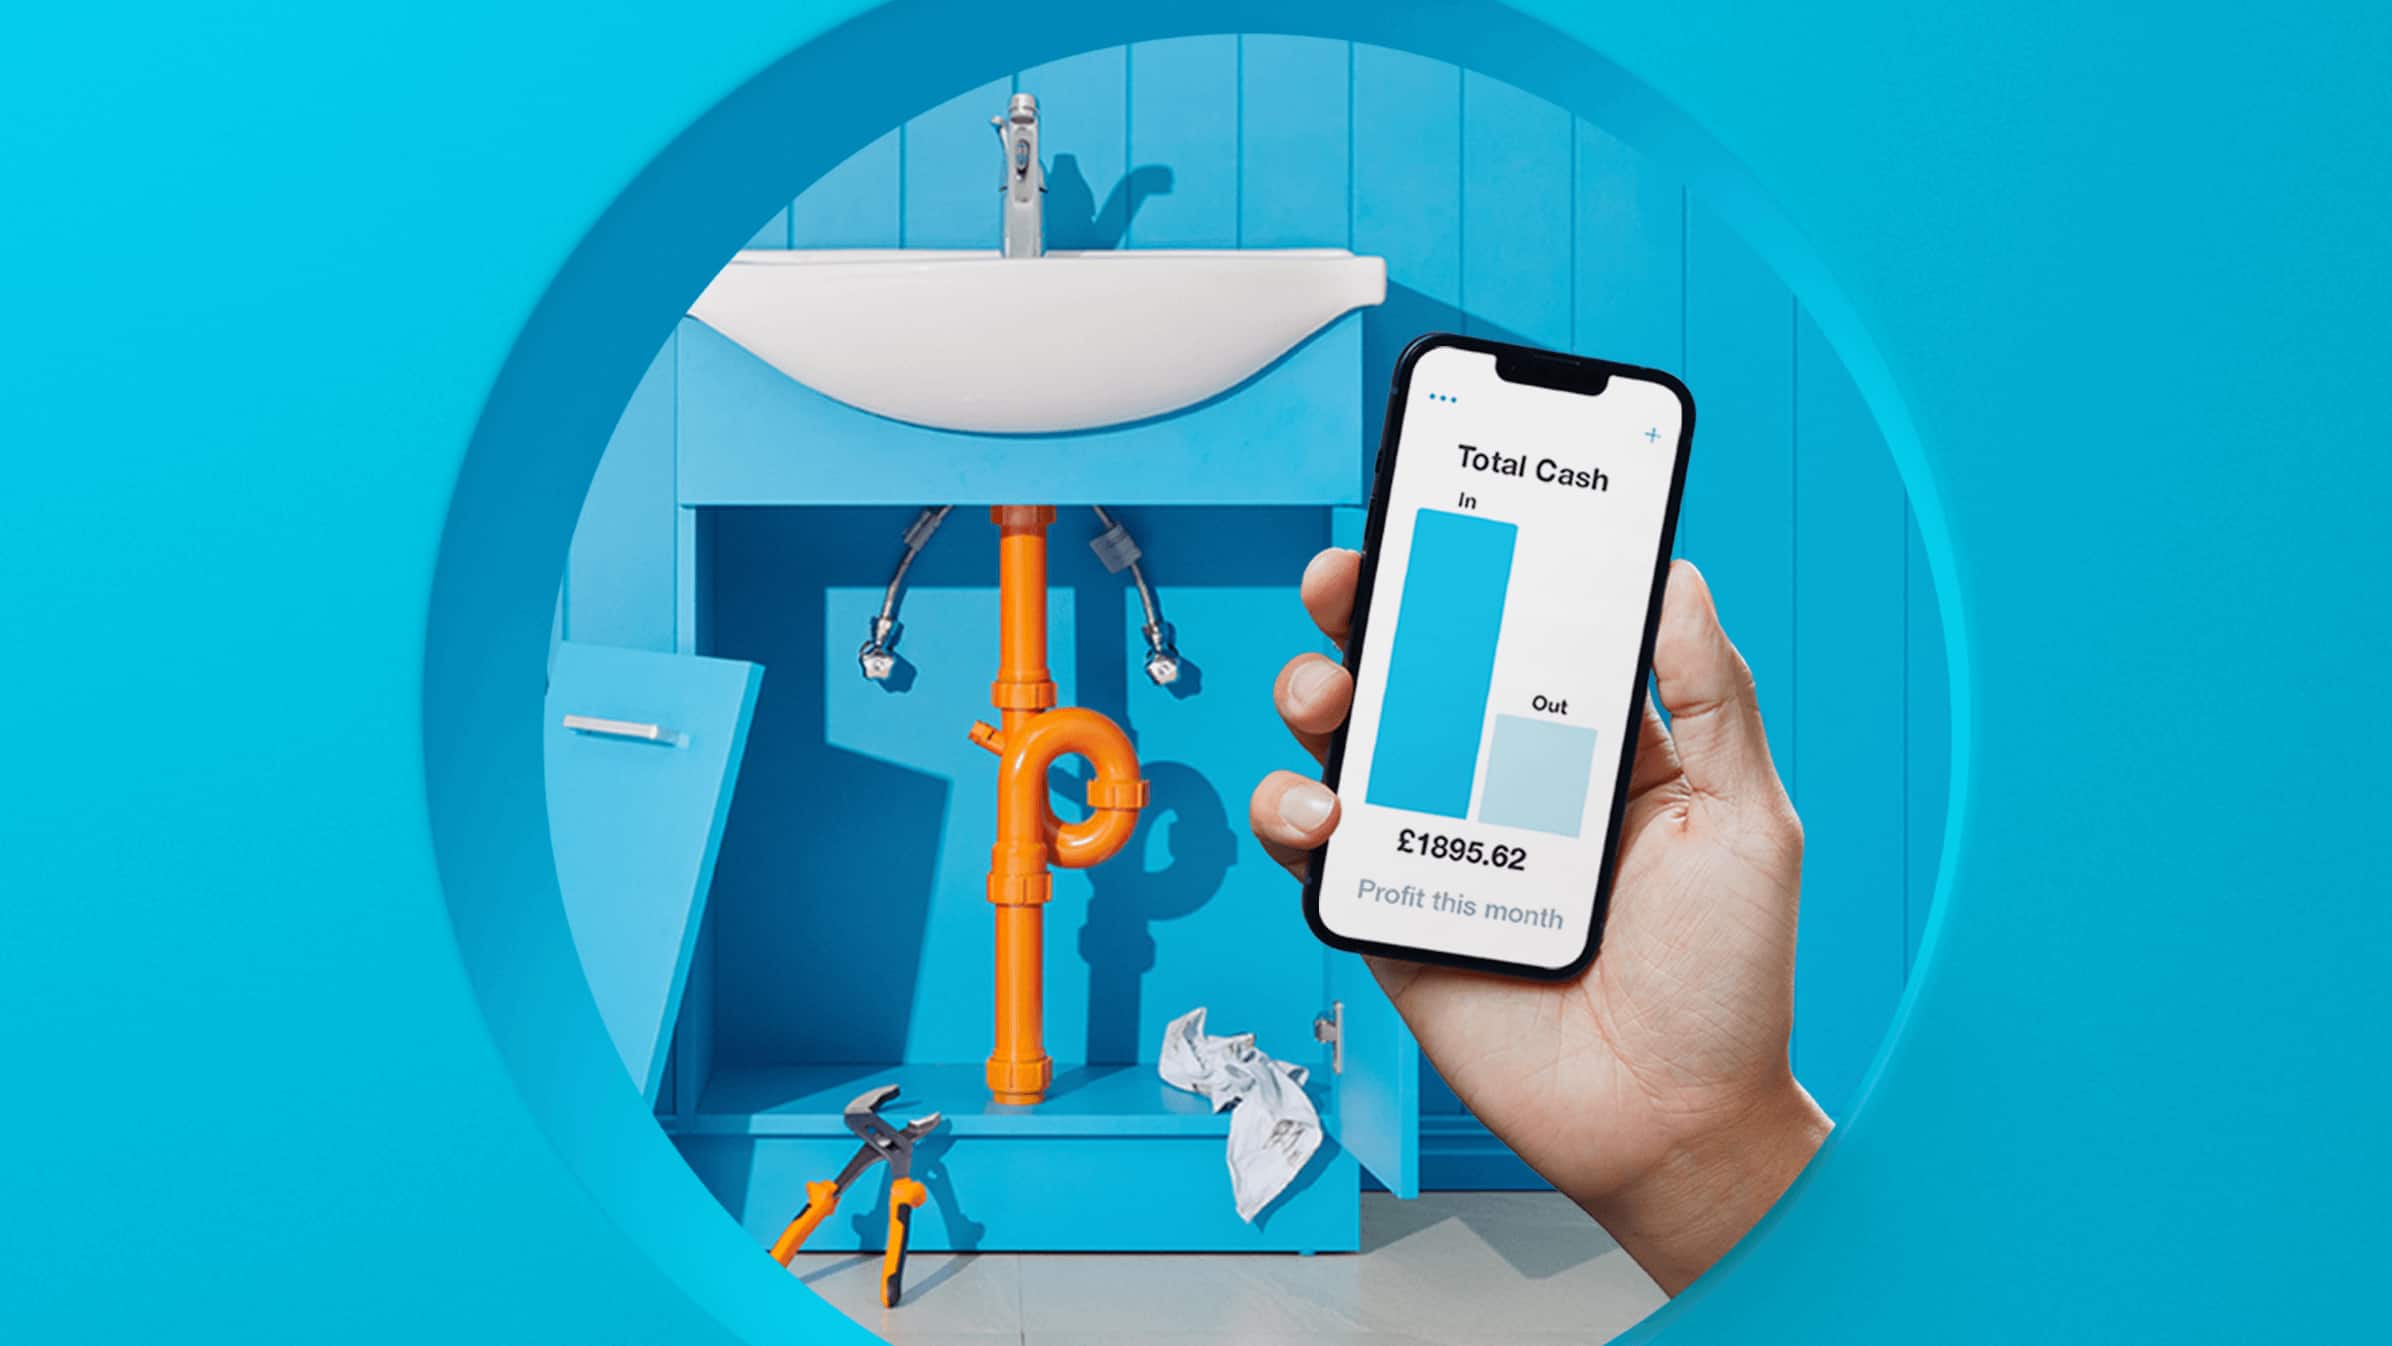 Xero blue sink with orange water pipes. Hand in front holding a phone device with cash flow dashboard.